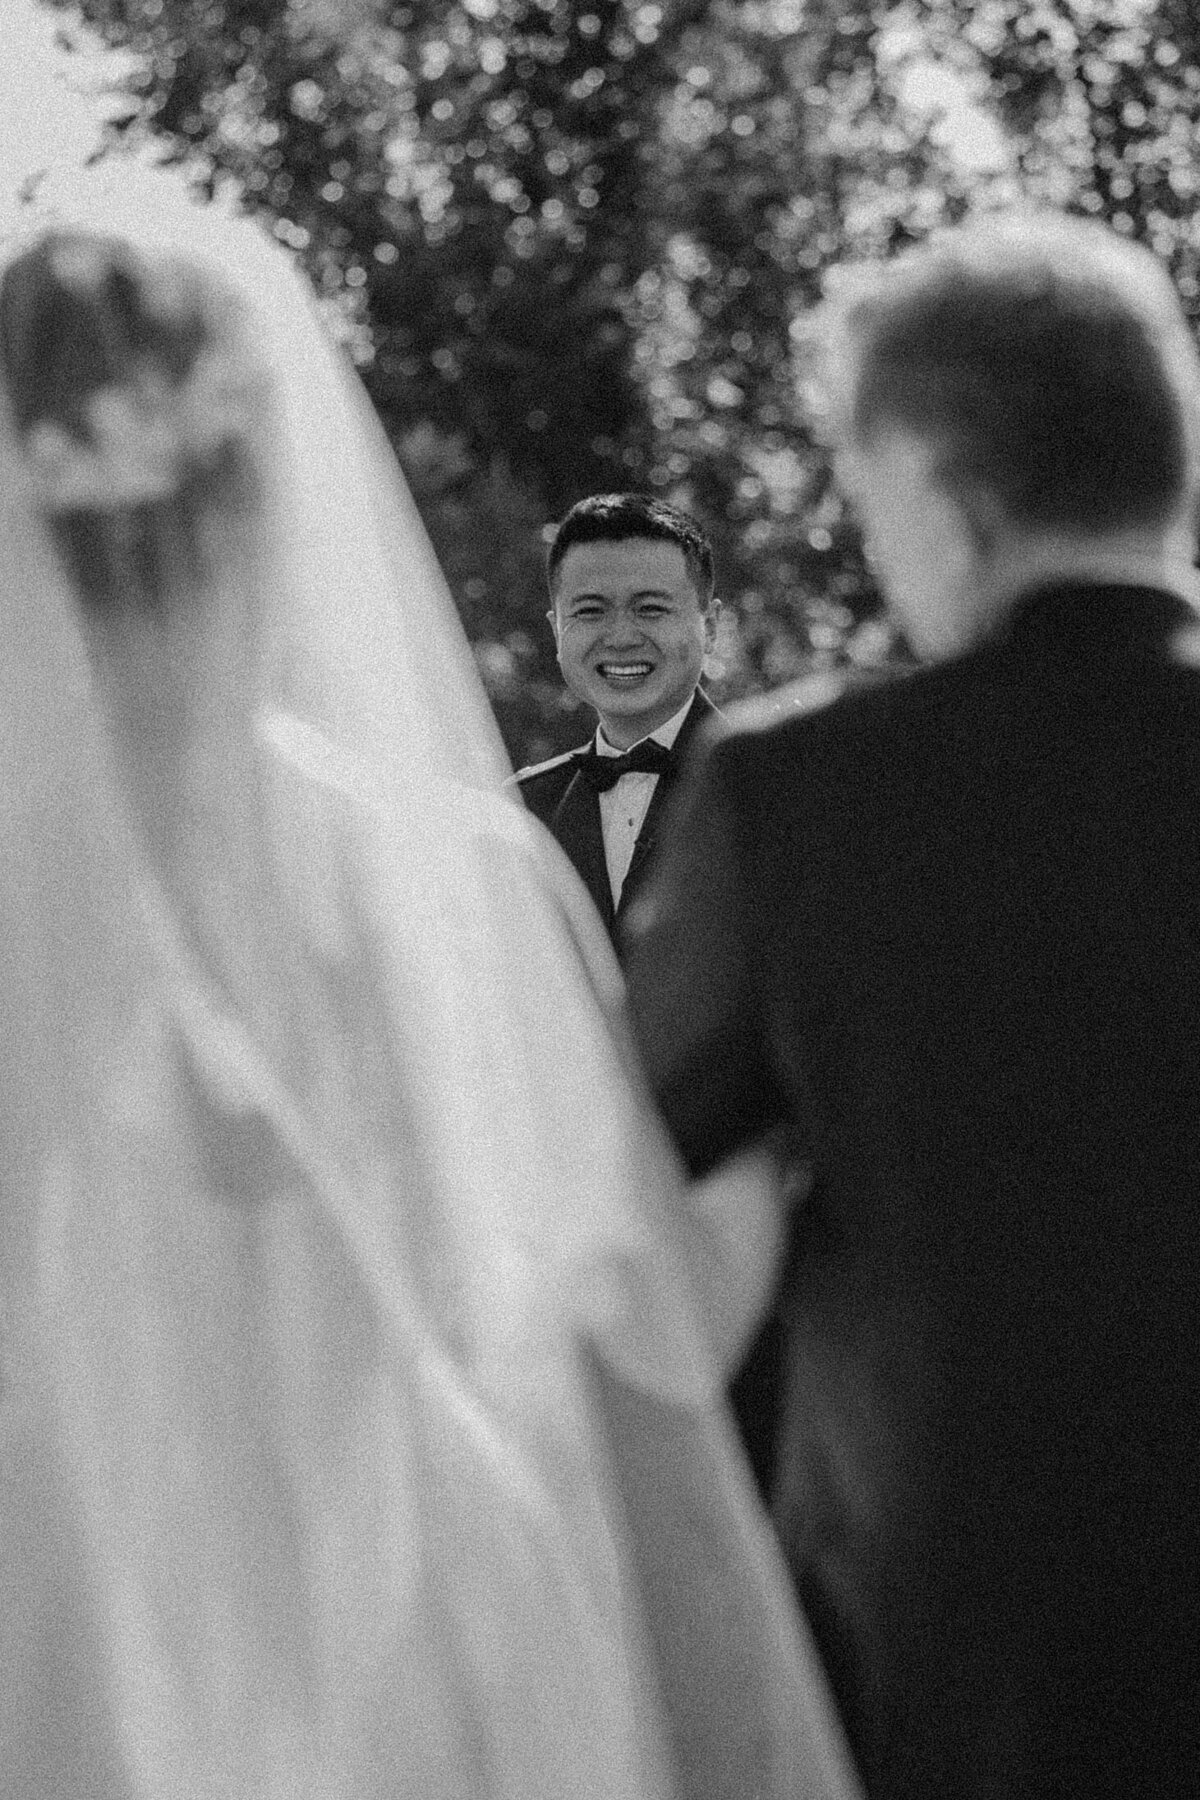 groom watching bride come down aisle